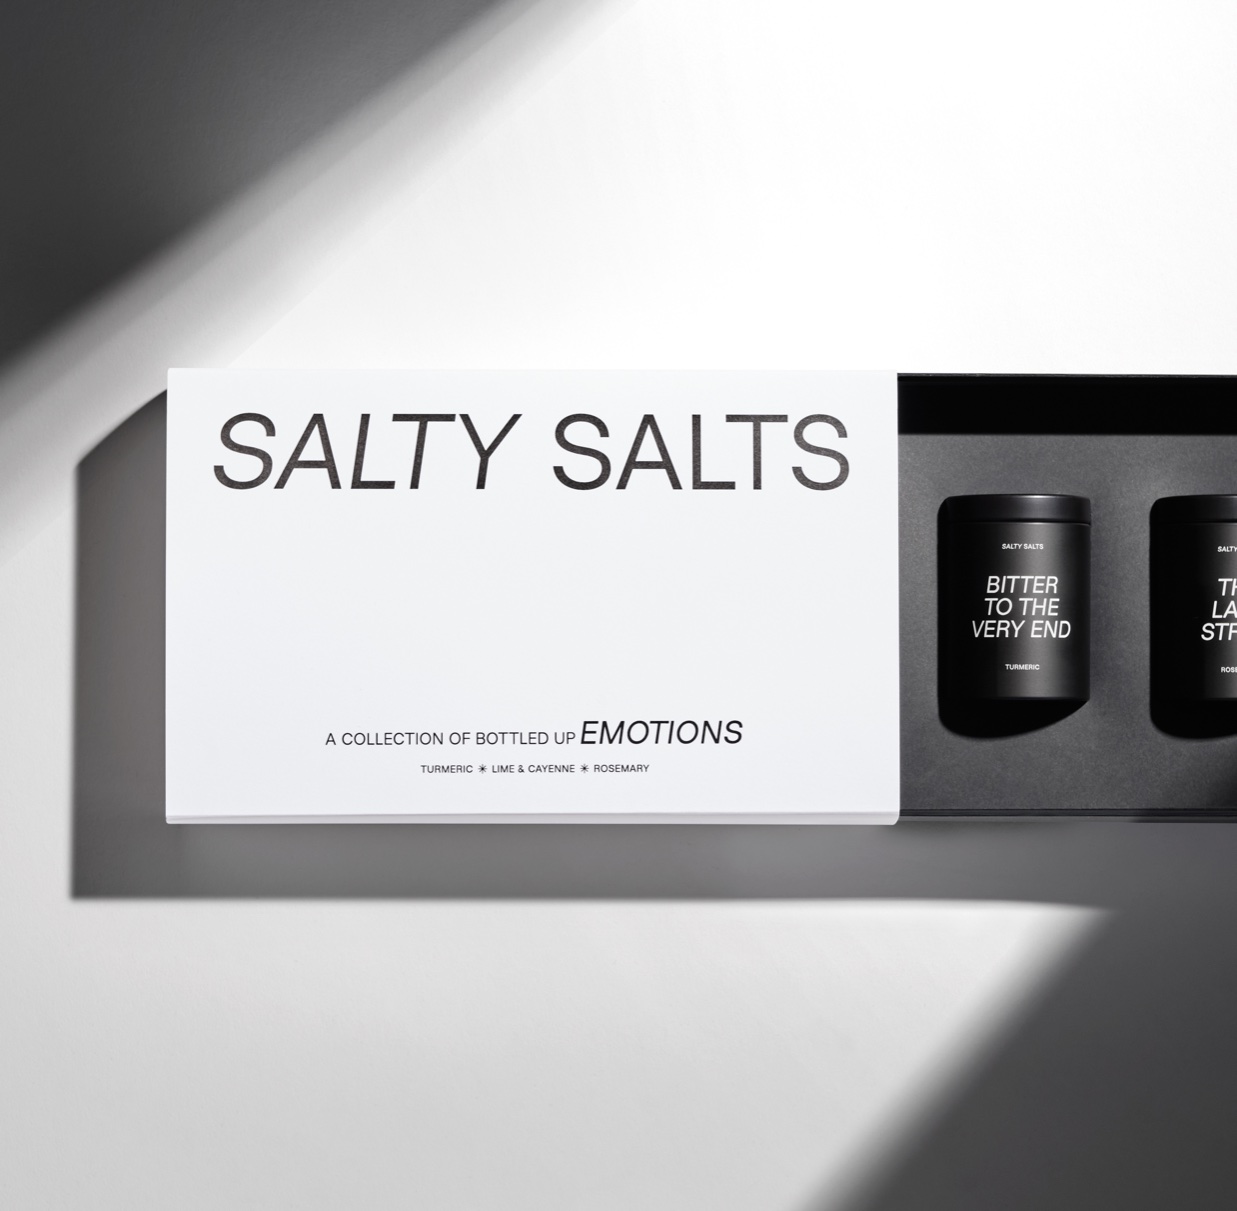 After A Year of Saltness Pendo Designed A Special Salty Promo